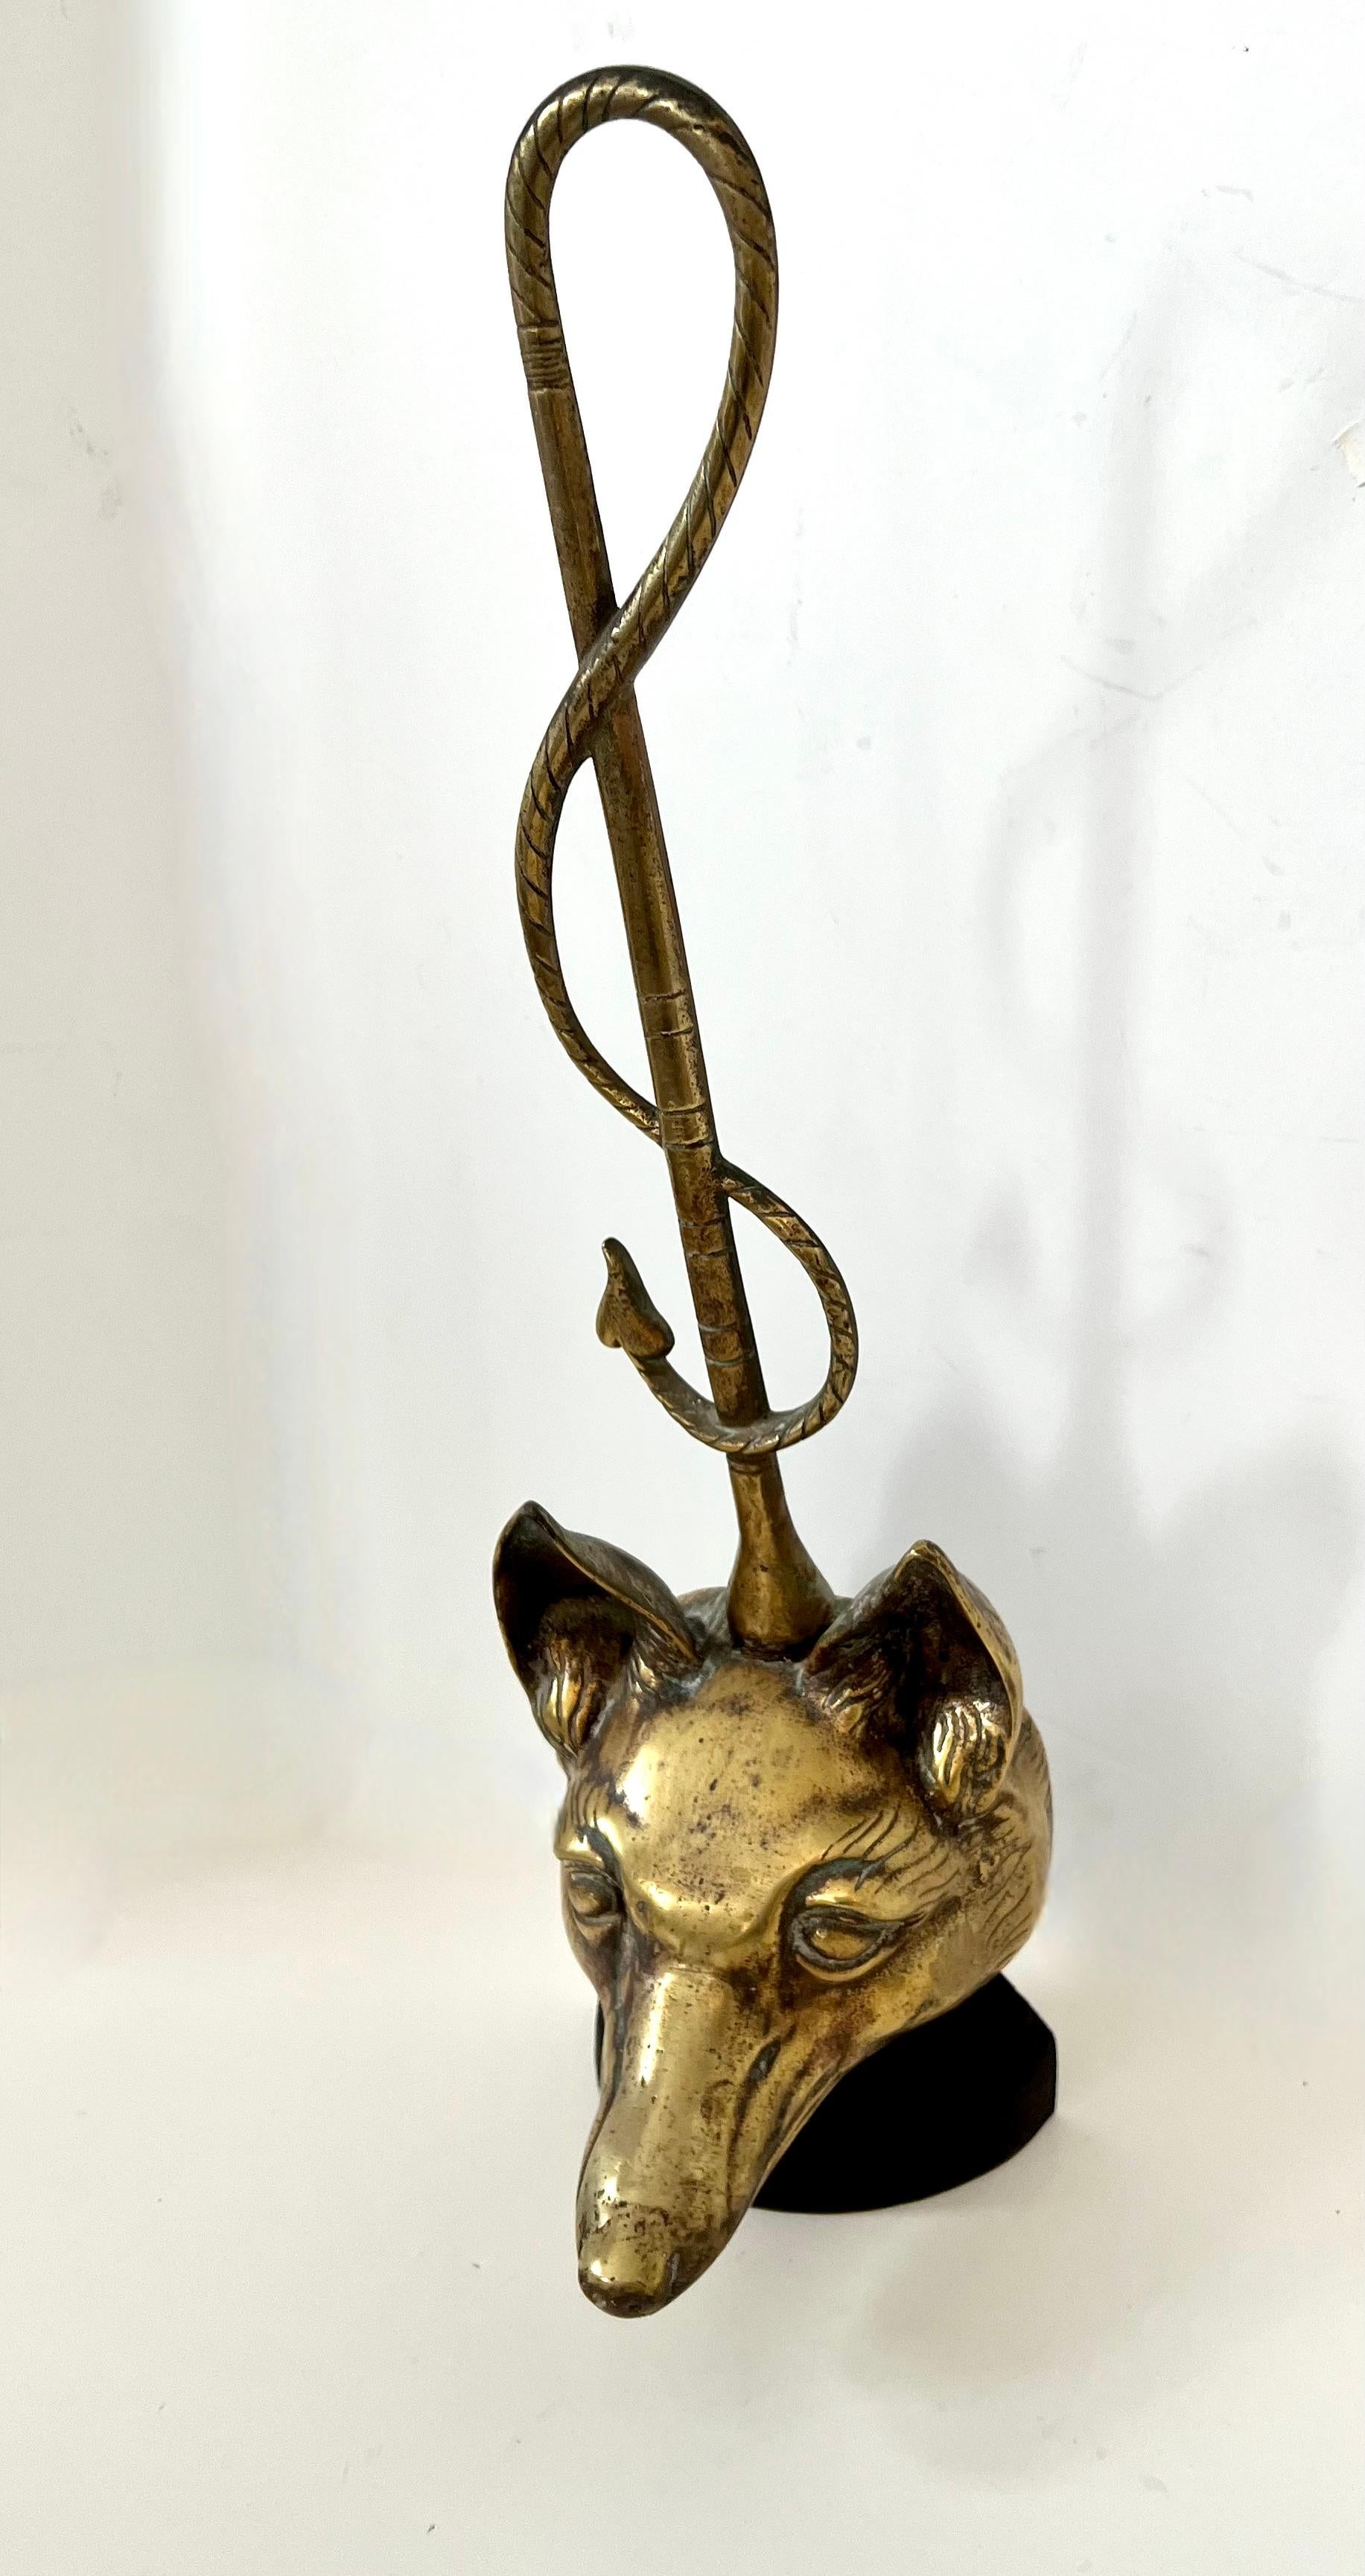 English Art Deco Brass Fox Door Stop With Riding Crop For Sale 3